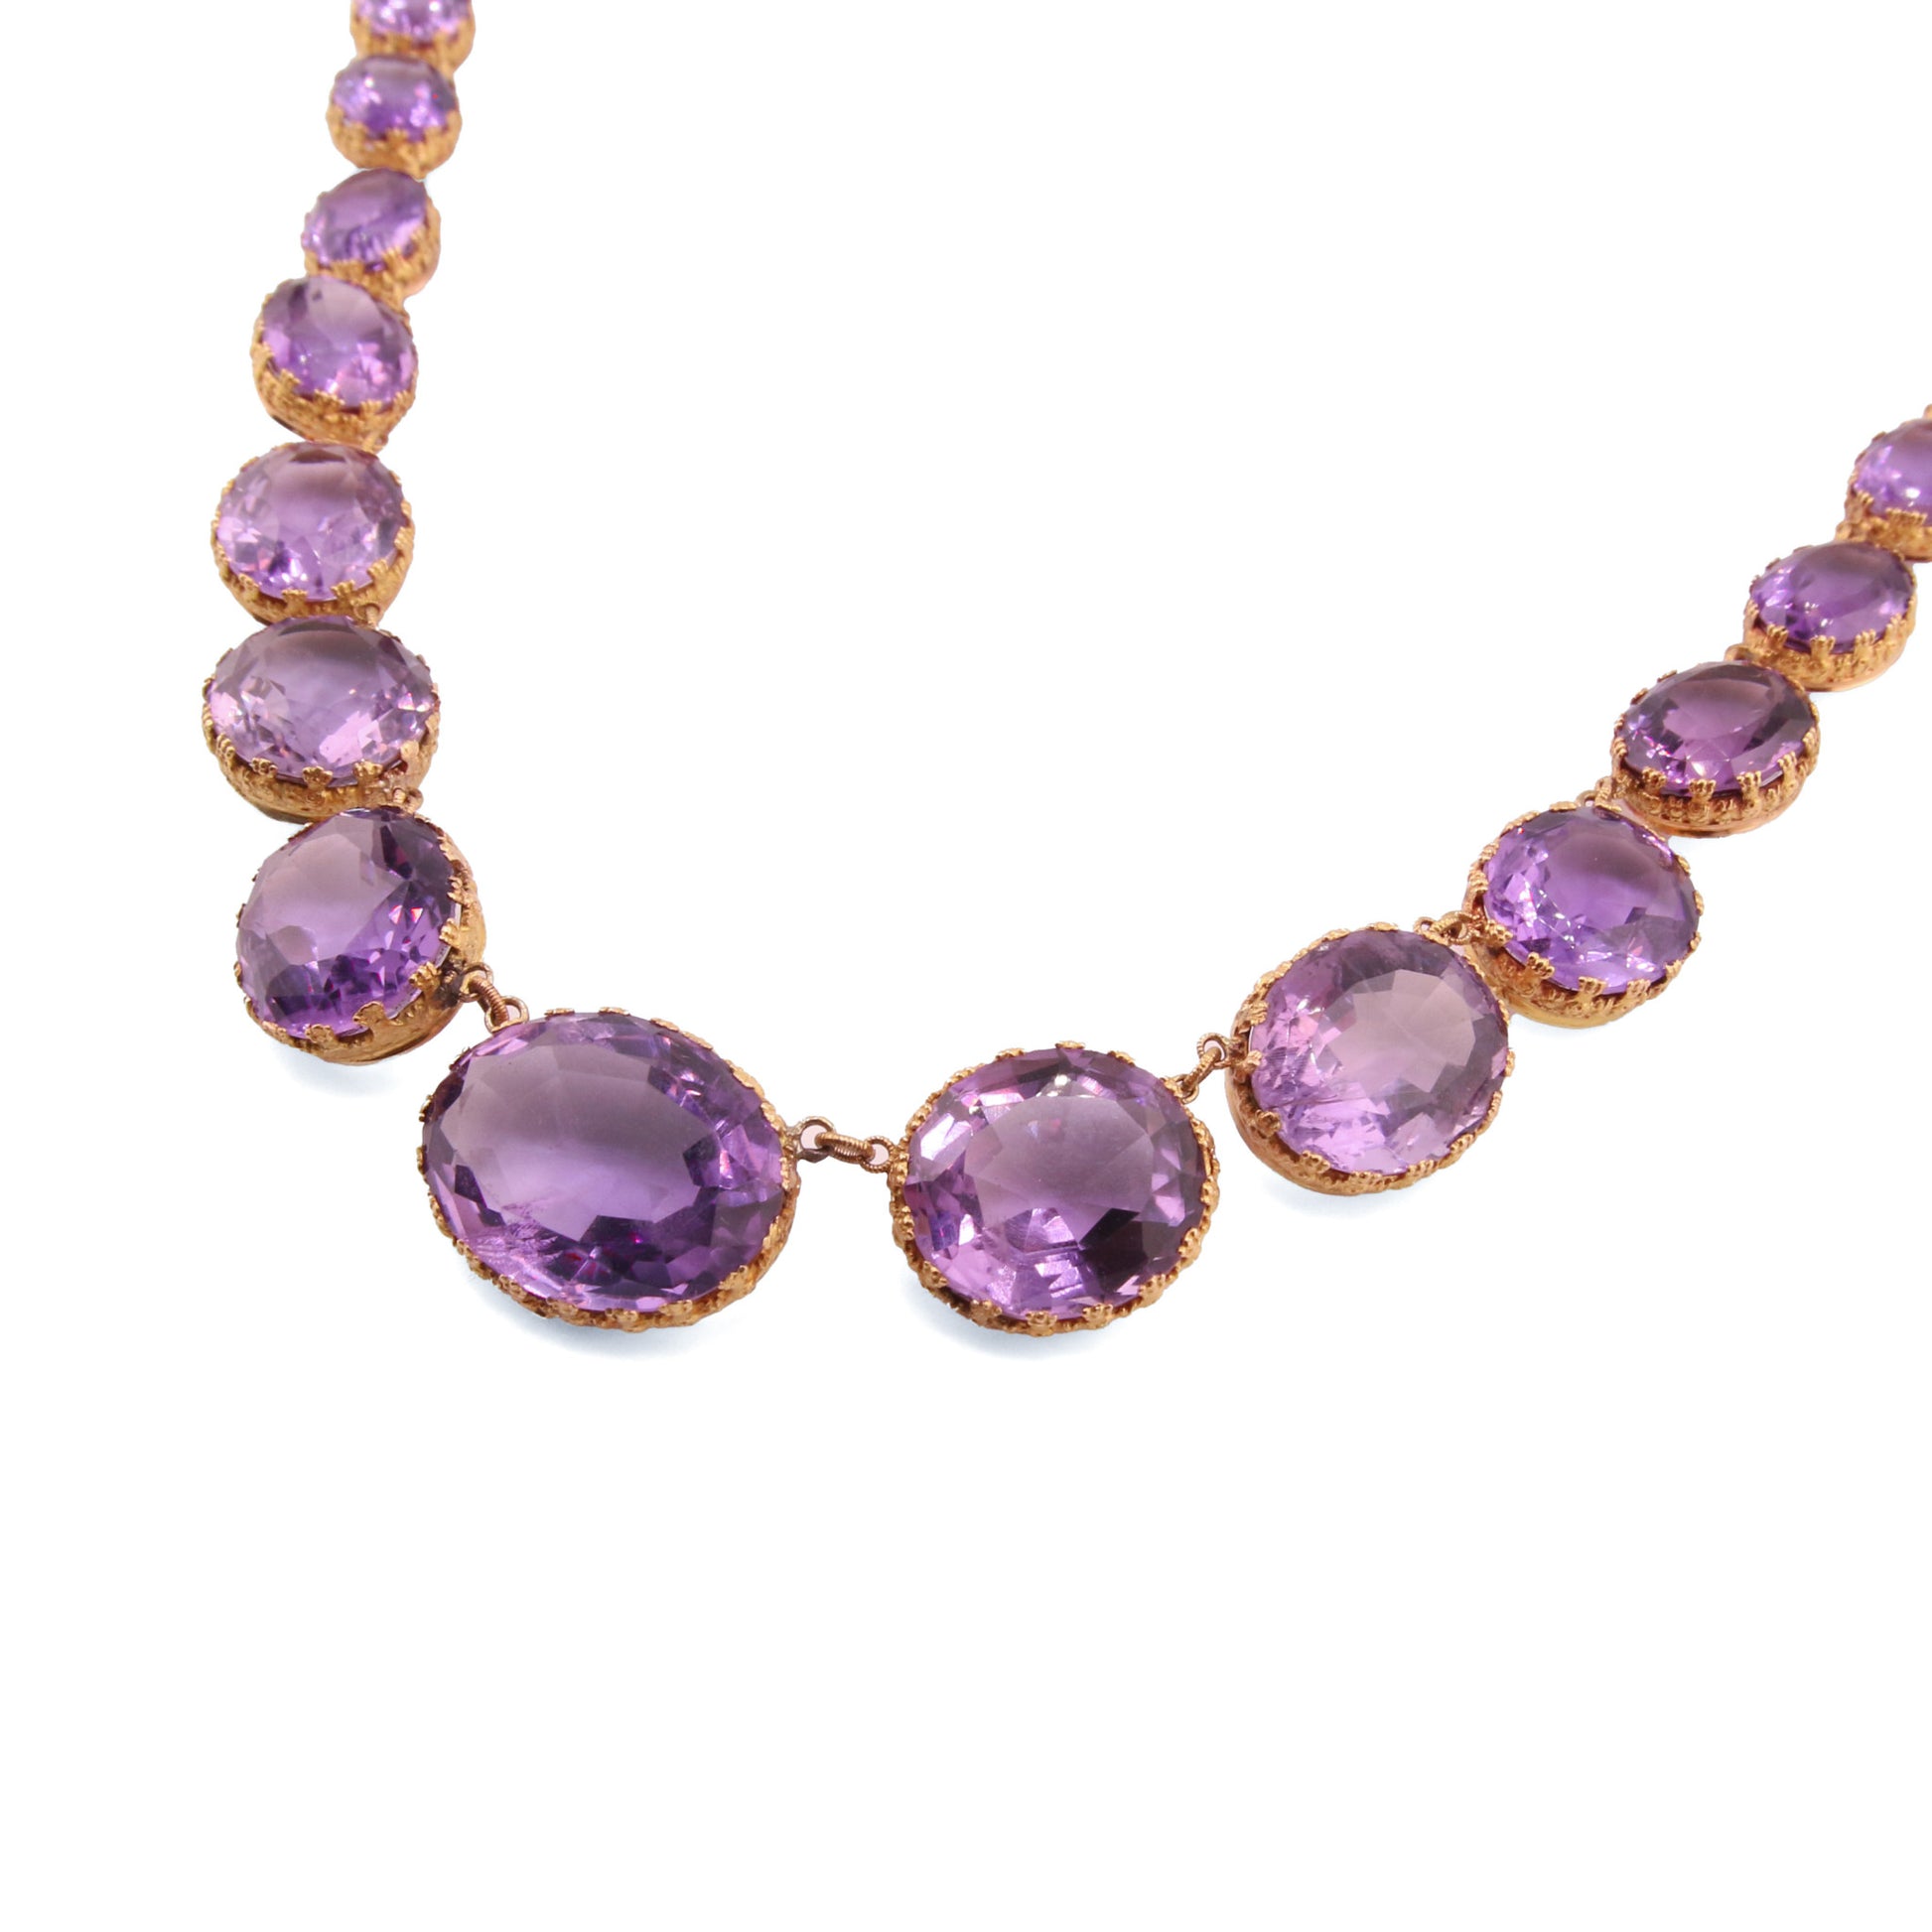 French Antique 18KT Yellow Gold Amethyst Necklace close-up front